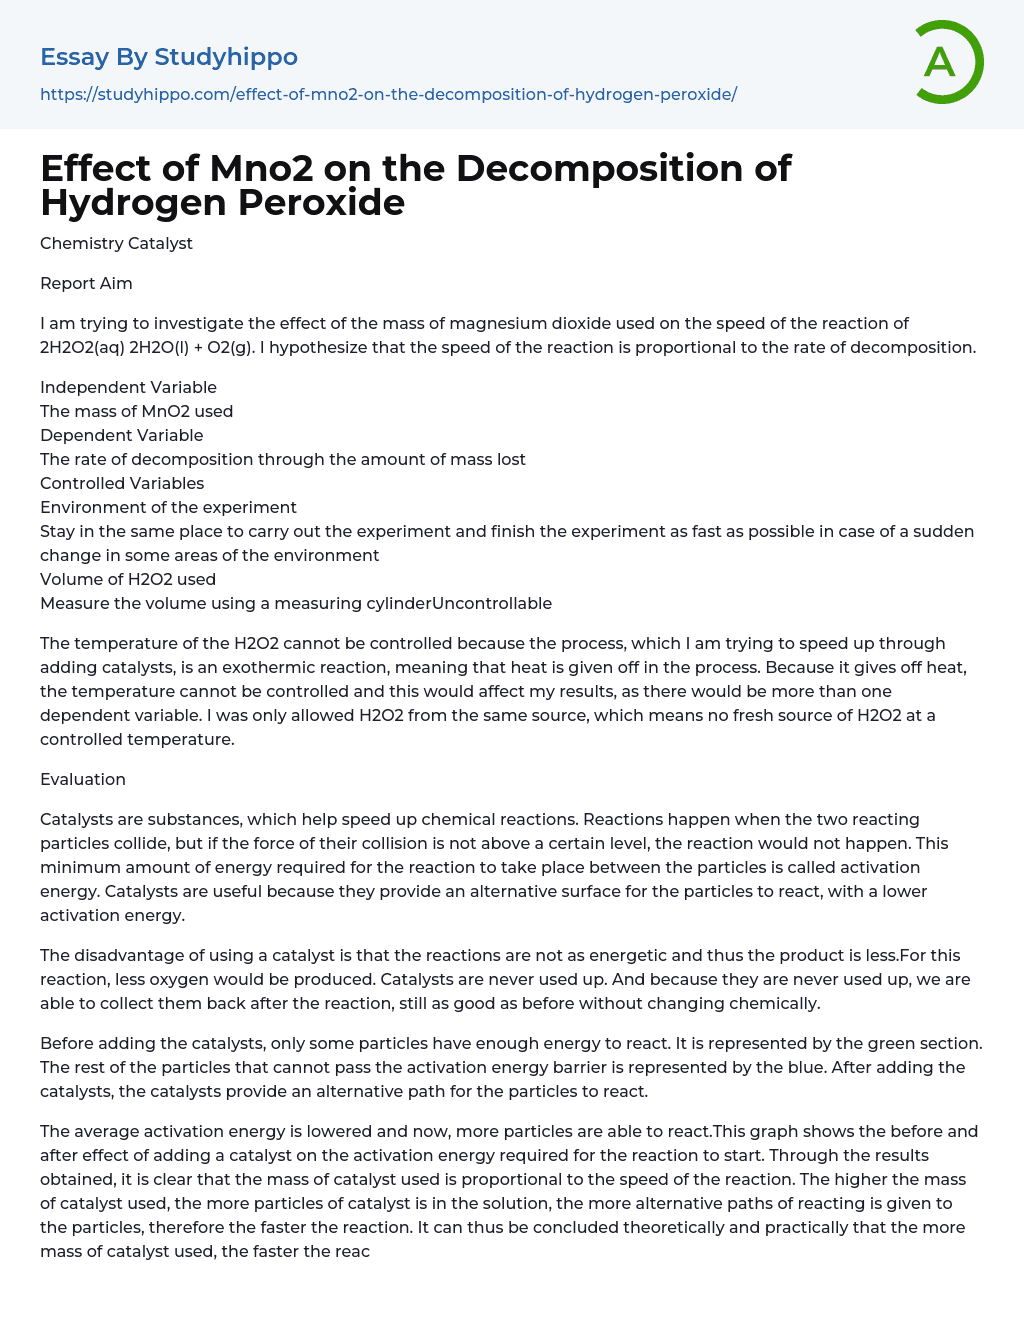 Effect of Mno2 on the Decomposition of Hydrogen Peroxide Essay Example